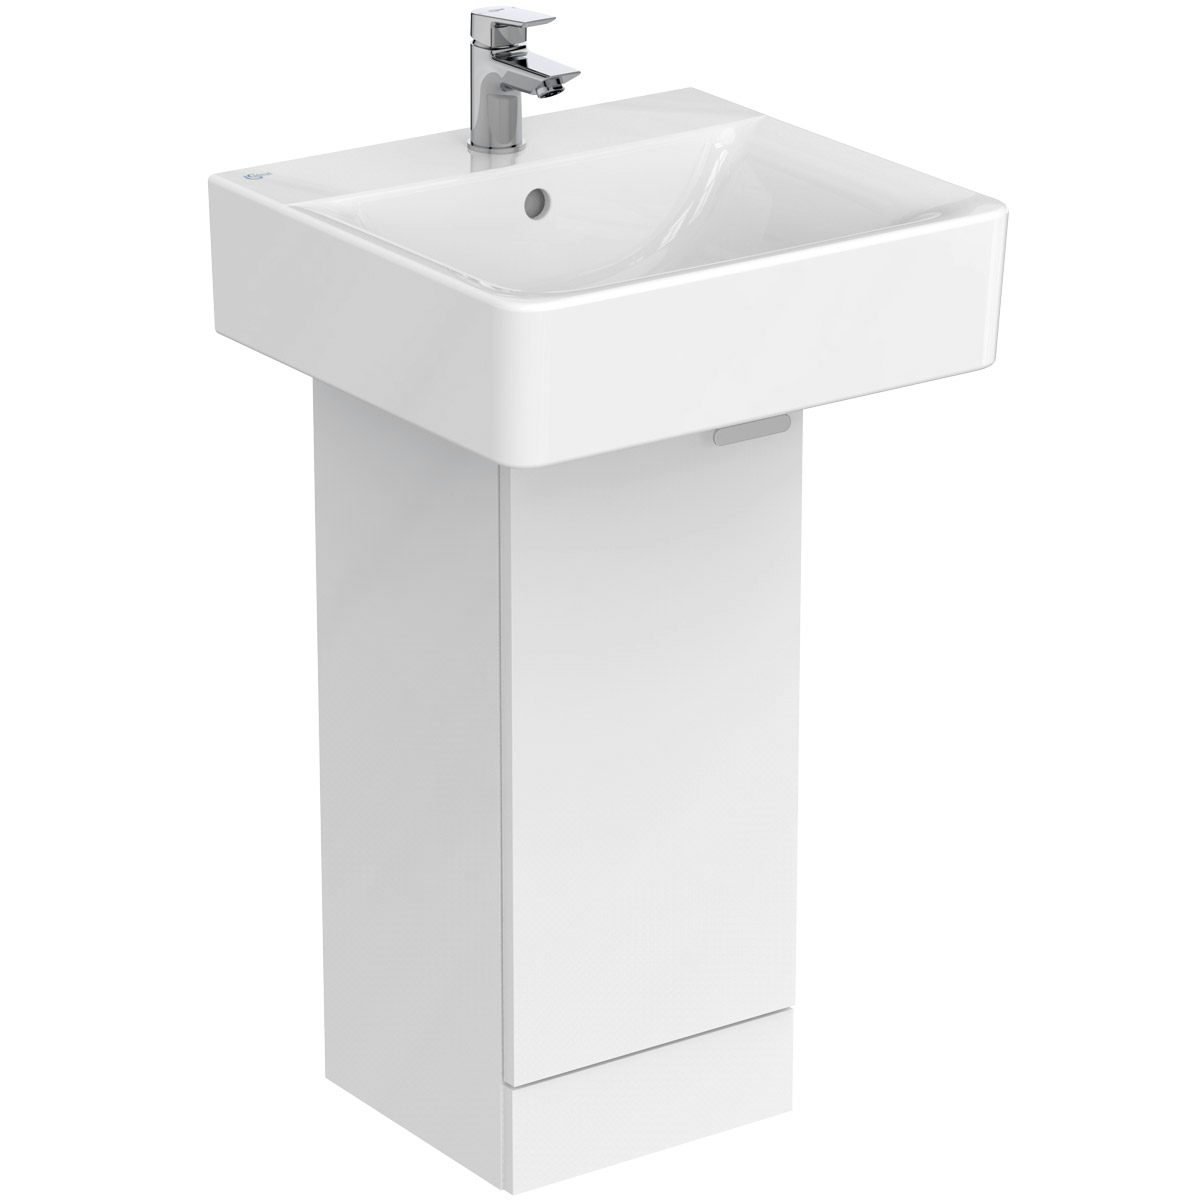 Ideal Standard Concept Space white pedestal unit with basin 300mm